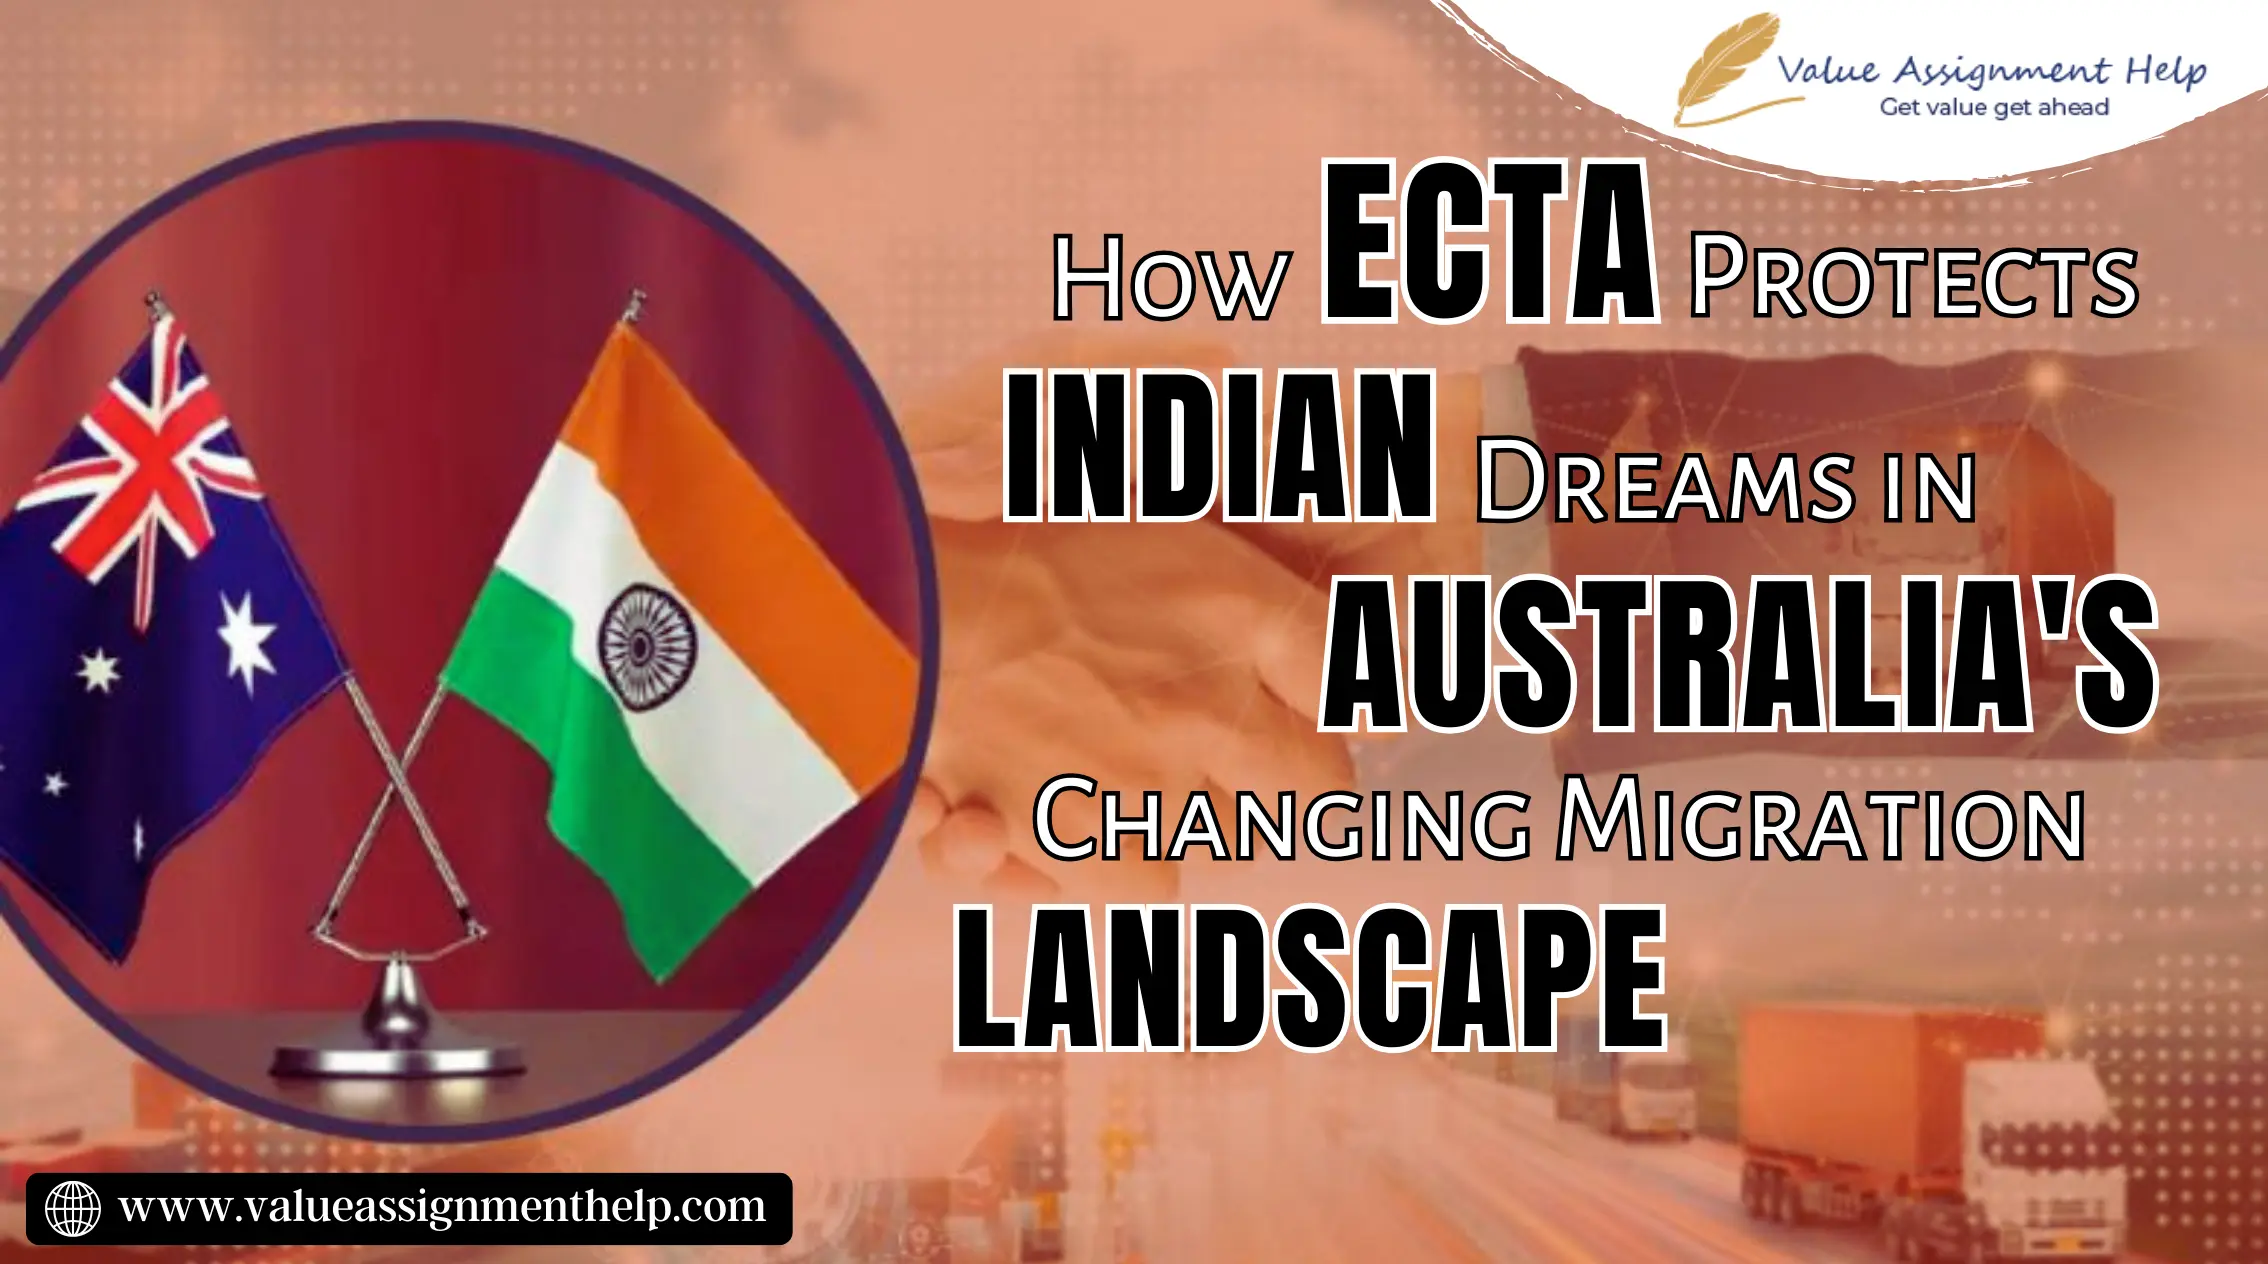  How ECTA Protects Indian Dreams in Australia's Changing Migration Landscape